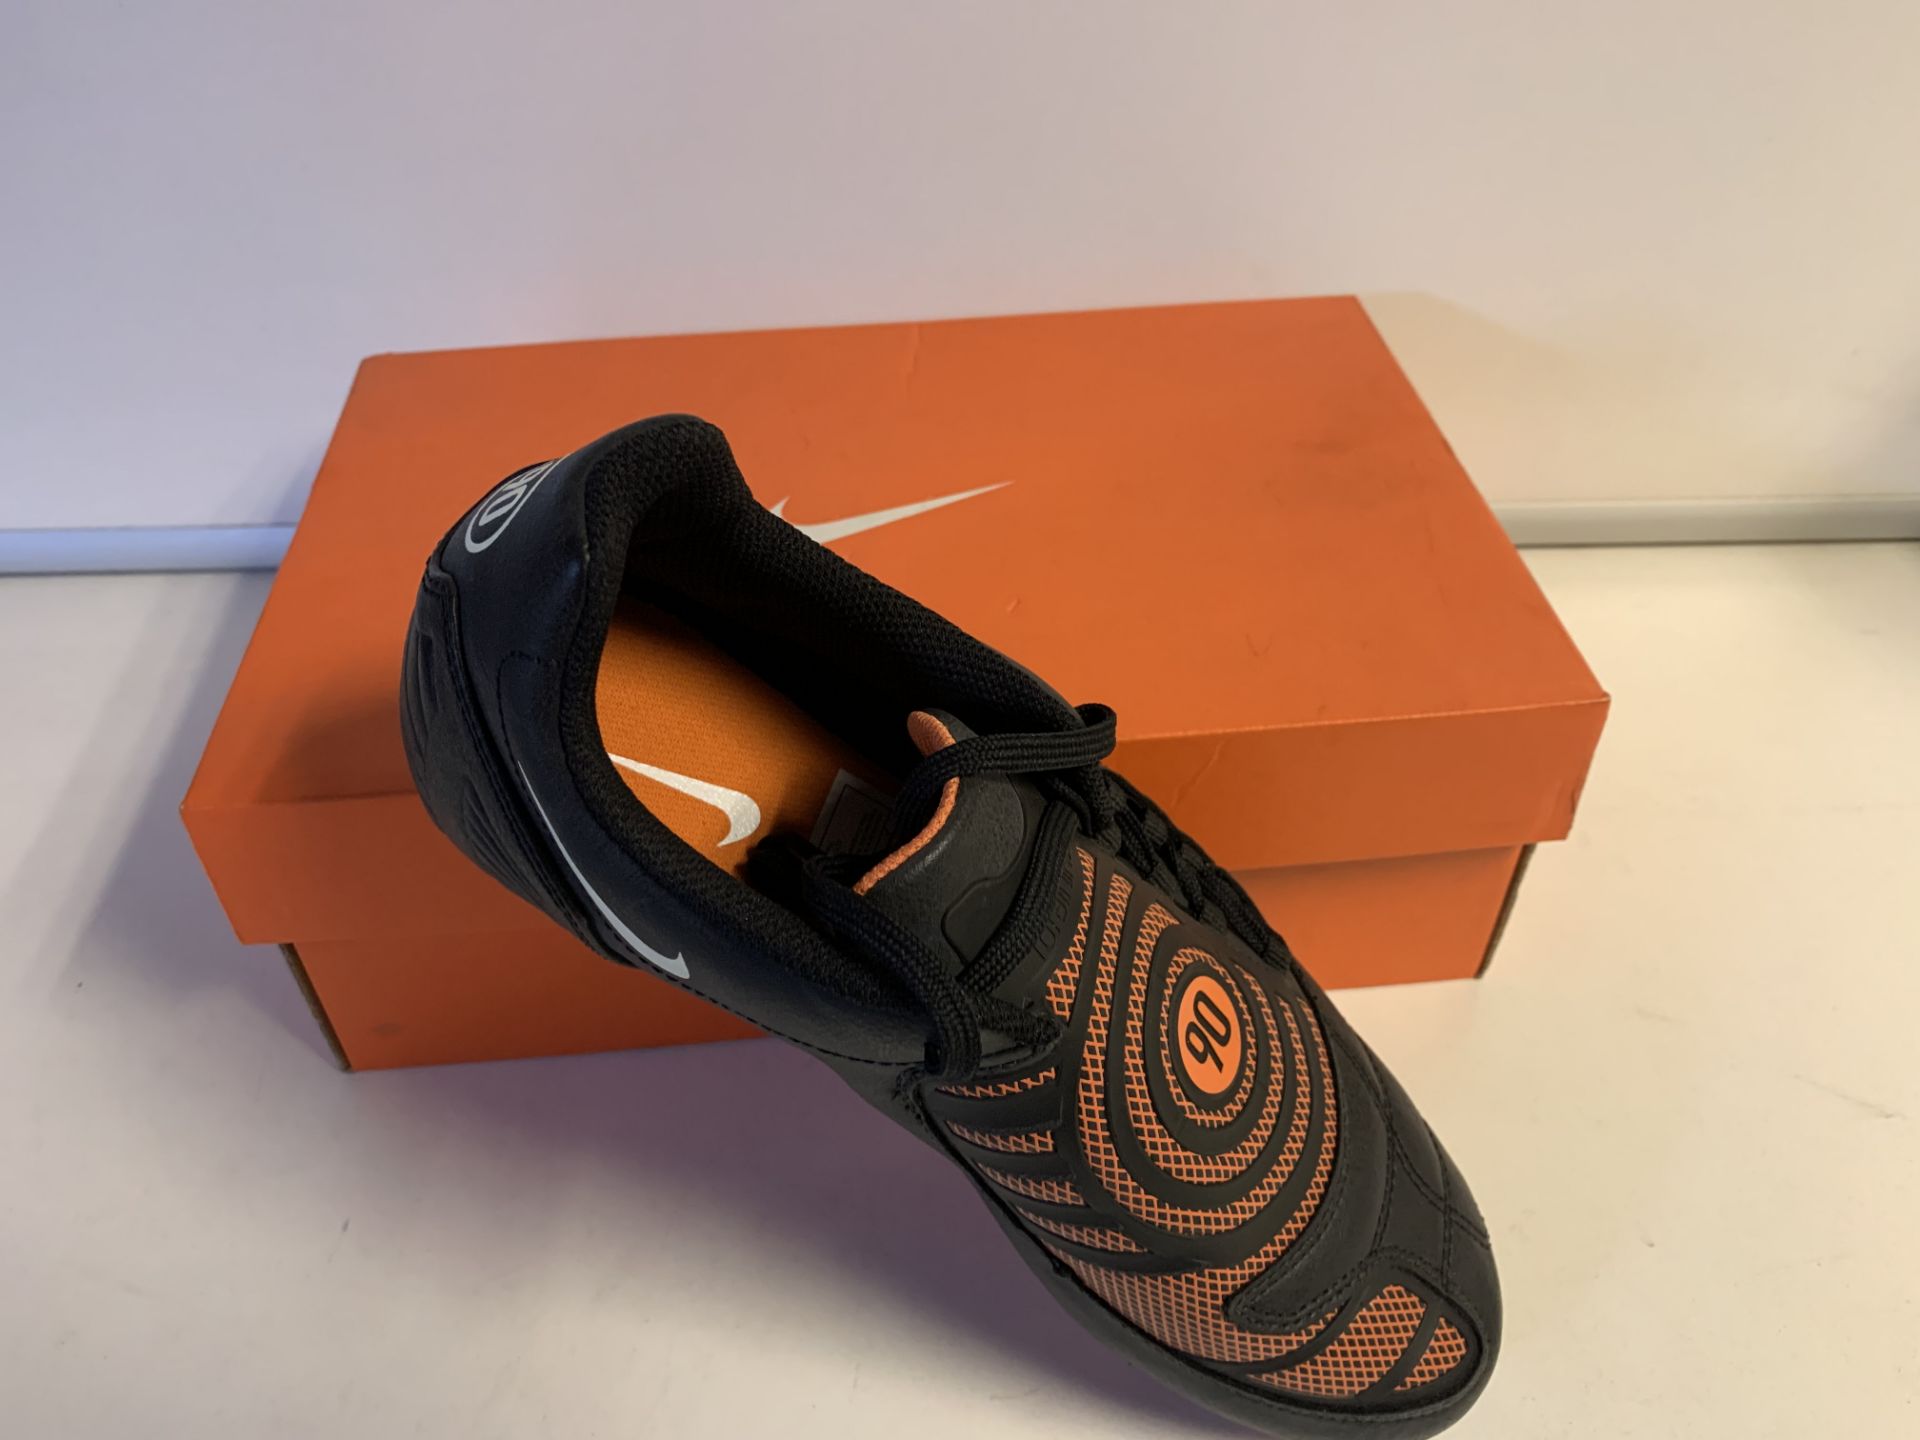 (NO VAT) 3 X BRAND NEW RETAIL BOXED NIKE JR TOTAL 90 SHOOT 2 EXTRA SG FOOTBALL BOOTS SIZE 5.5